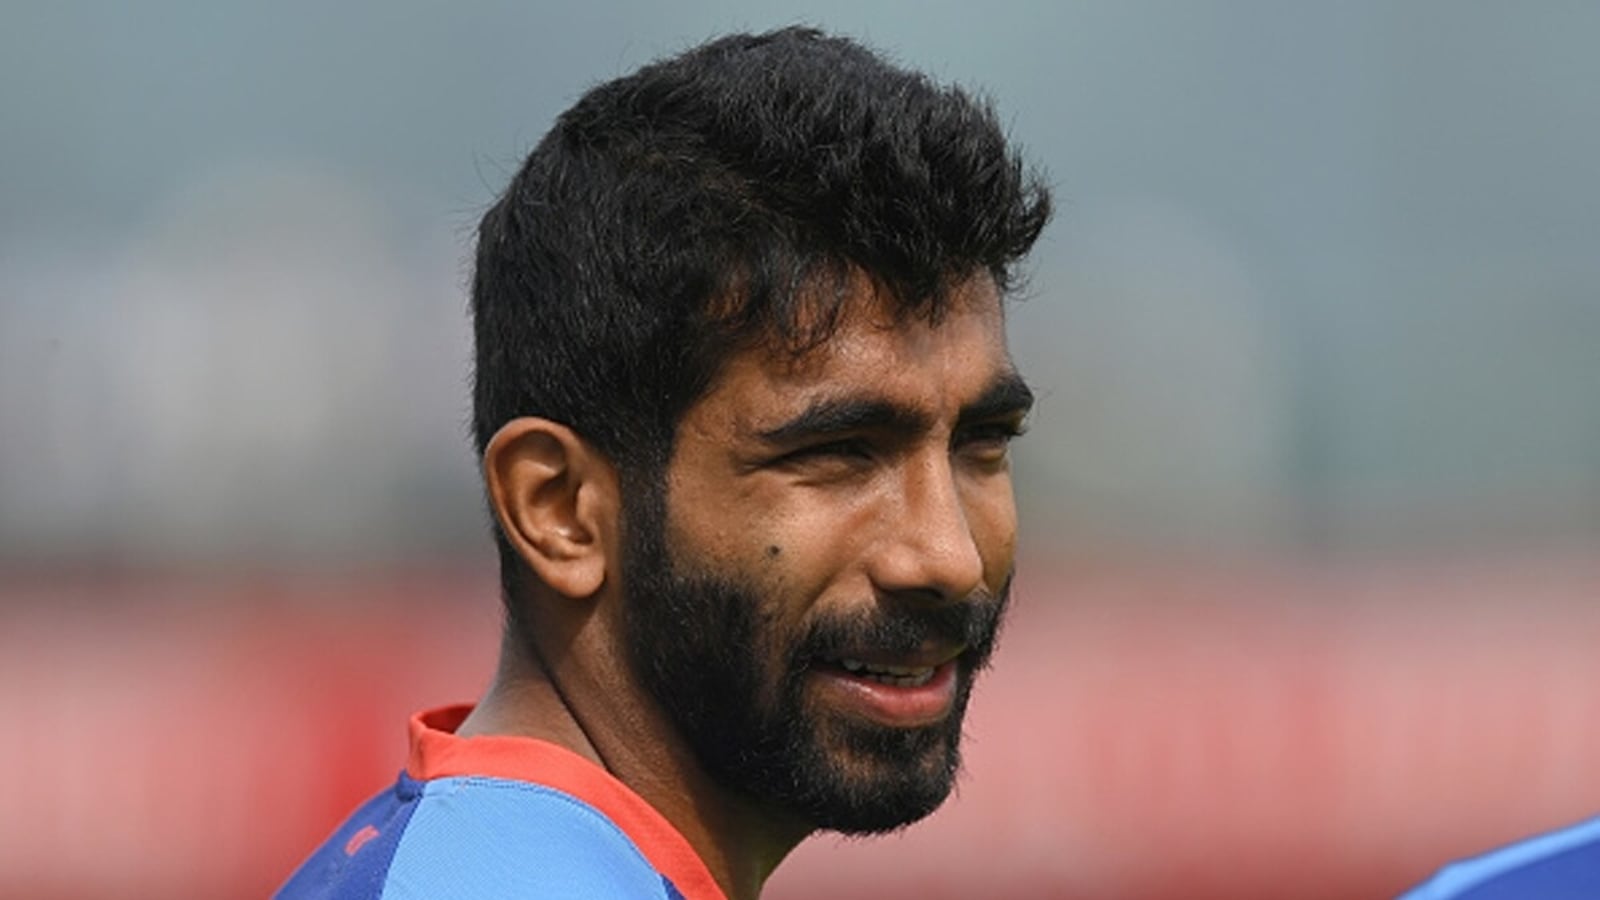 i-wasn-t-always-like-this-when-i-first-started-playing-cricket-jasprit-bumrah-opens-up-on-dealing-with-setbacks